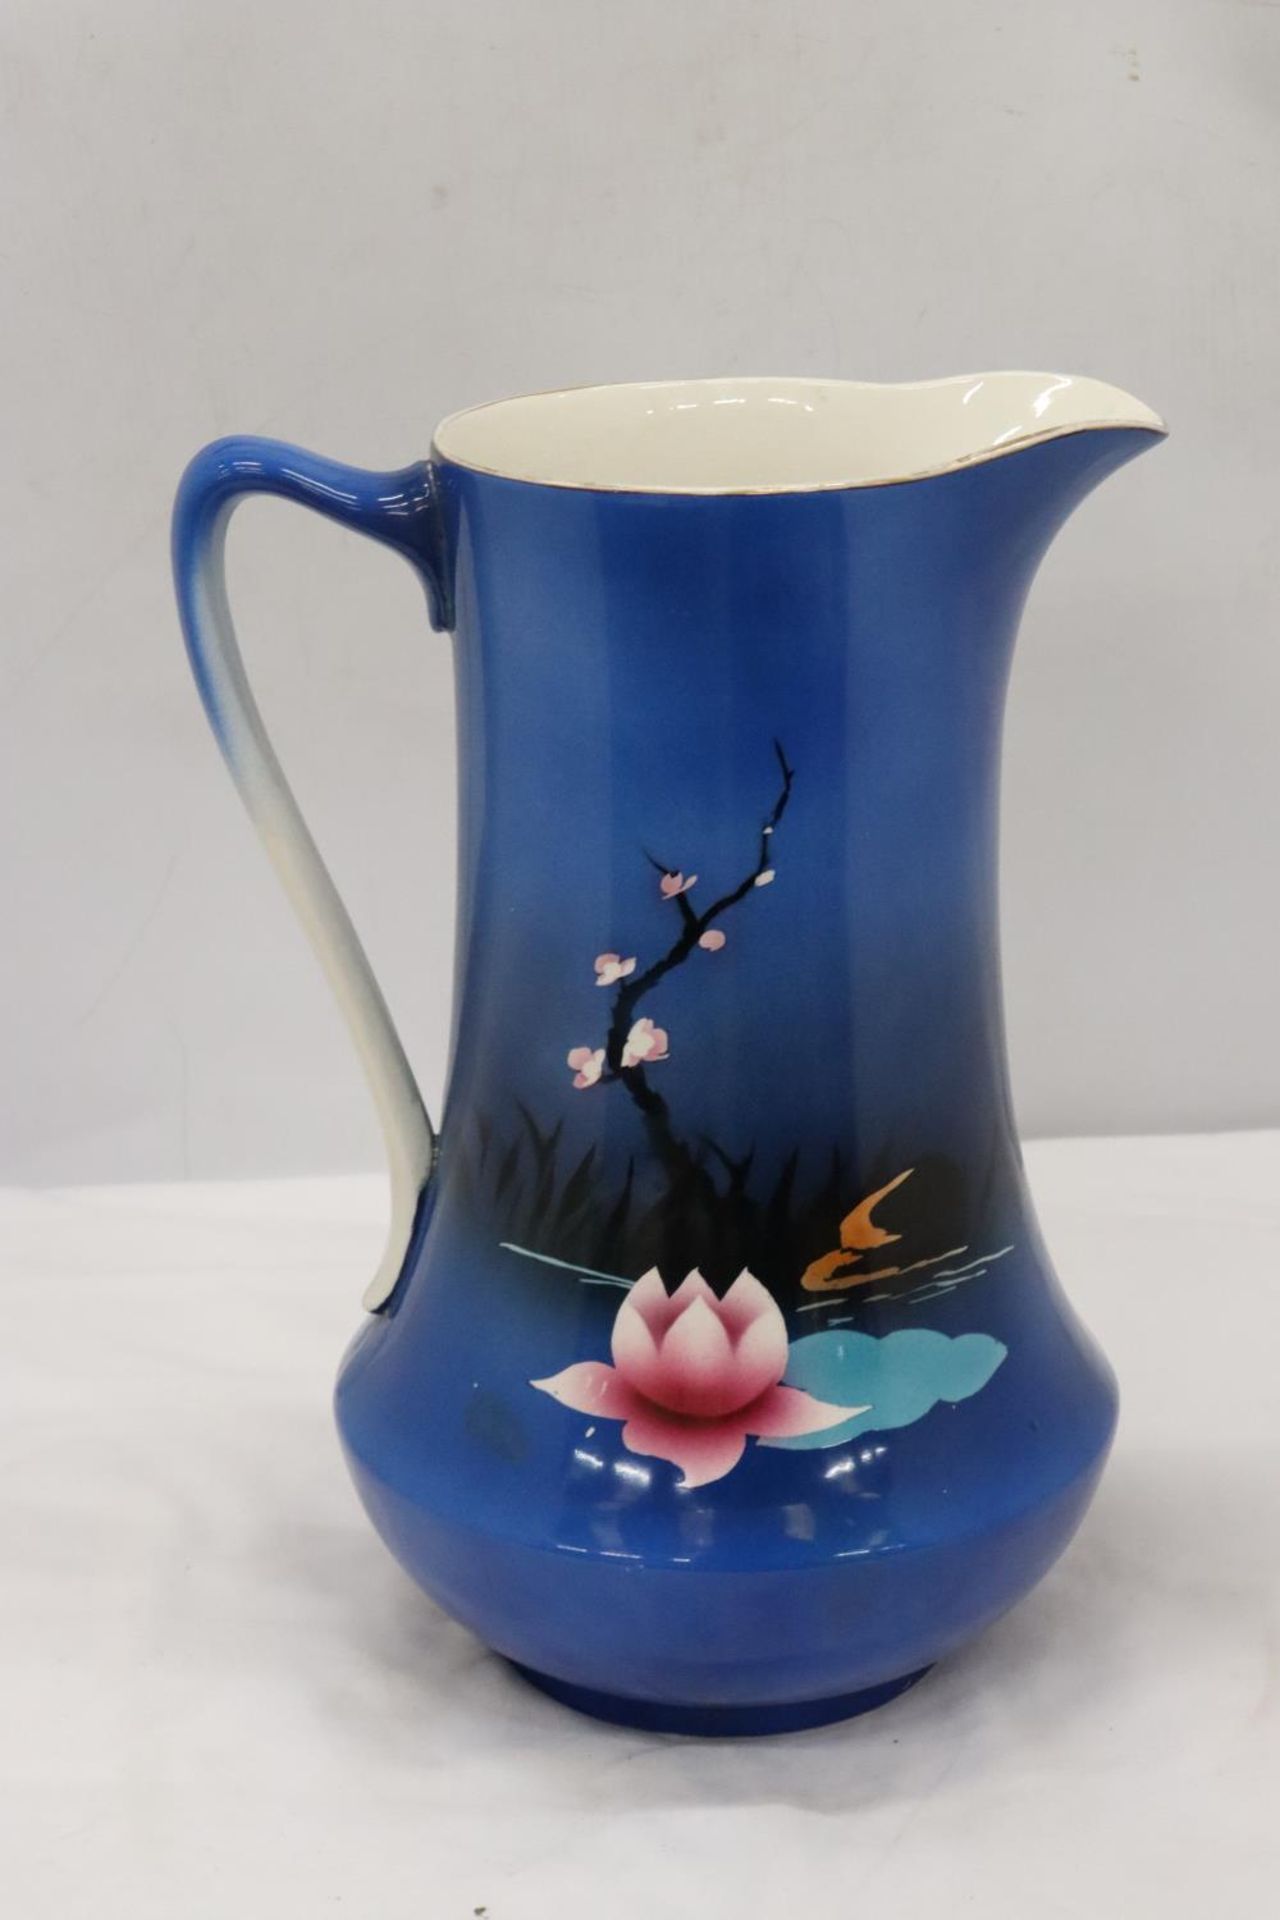 A LARGE ROYAL VENTON WARE (1930'S) JUG WITH KINGFISHER DESIGN - Image 3 of 6